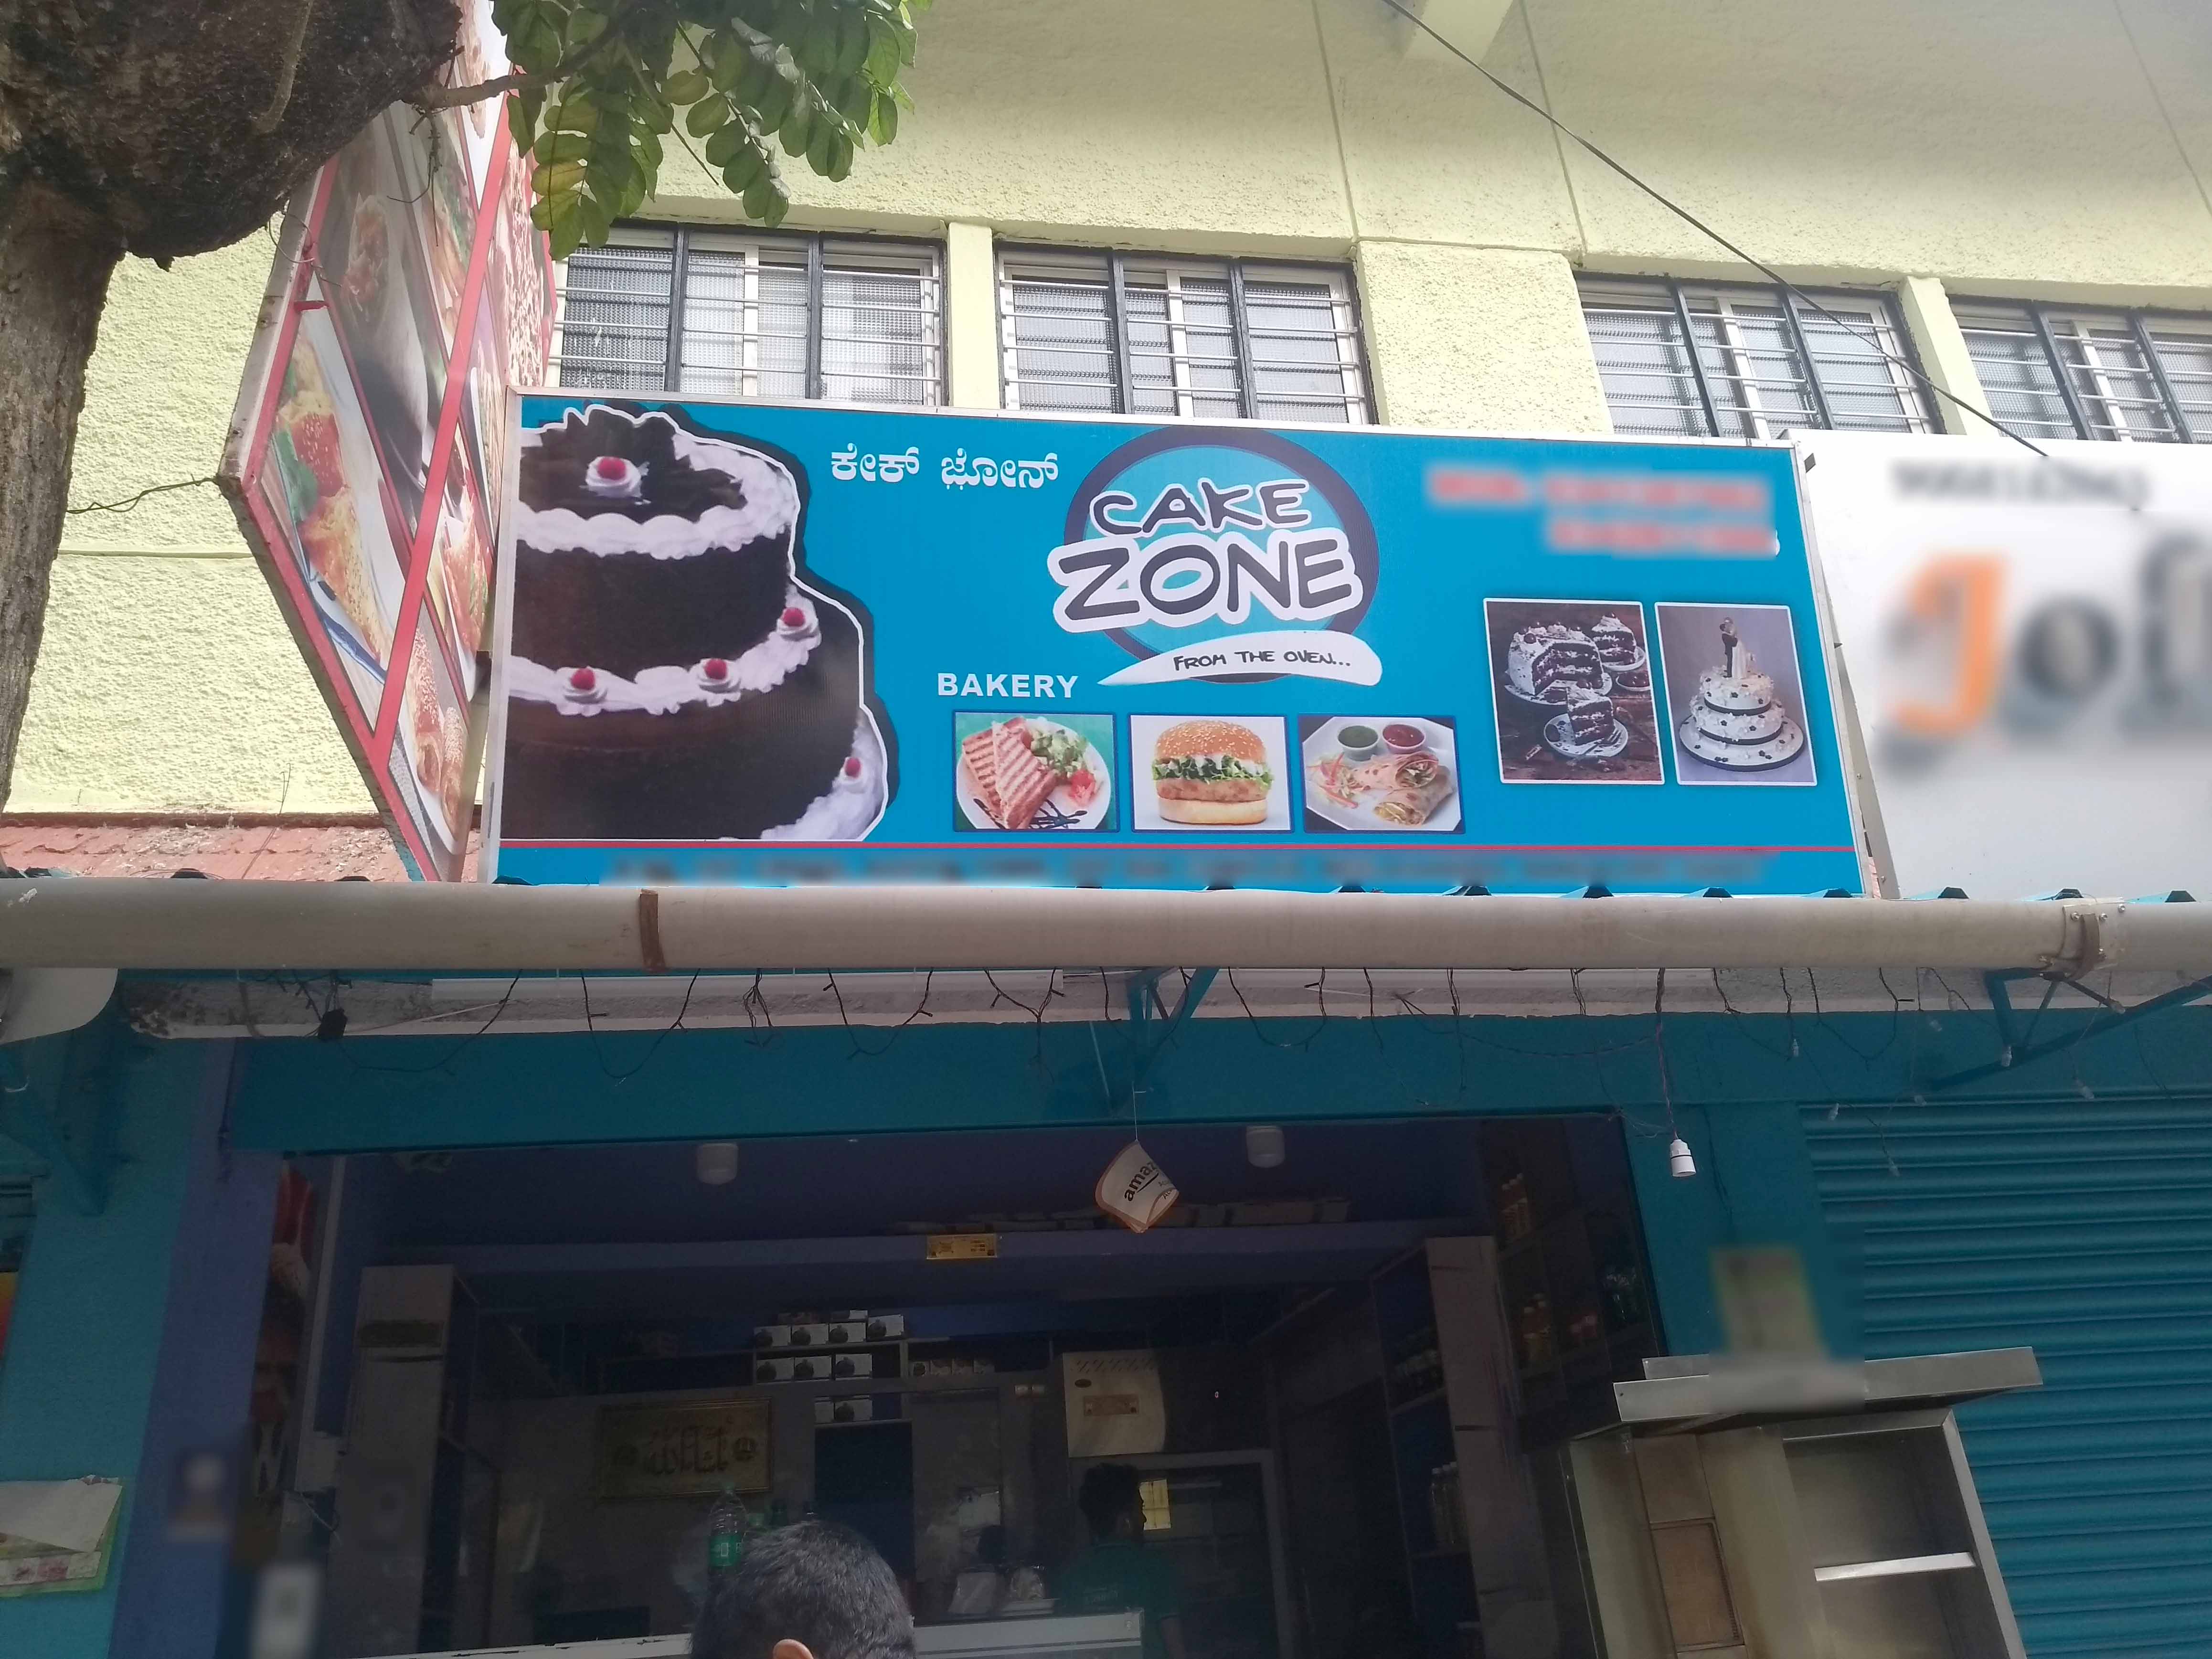 Discover more than 126 cake zone online order best - awesomeenglish.edu.vn